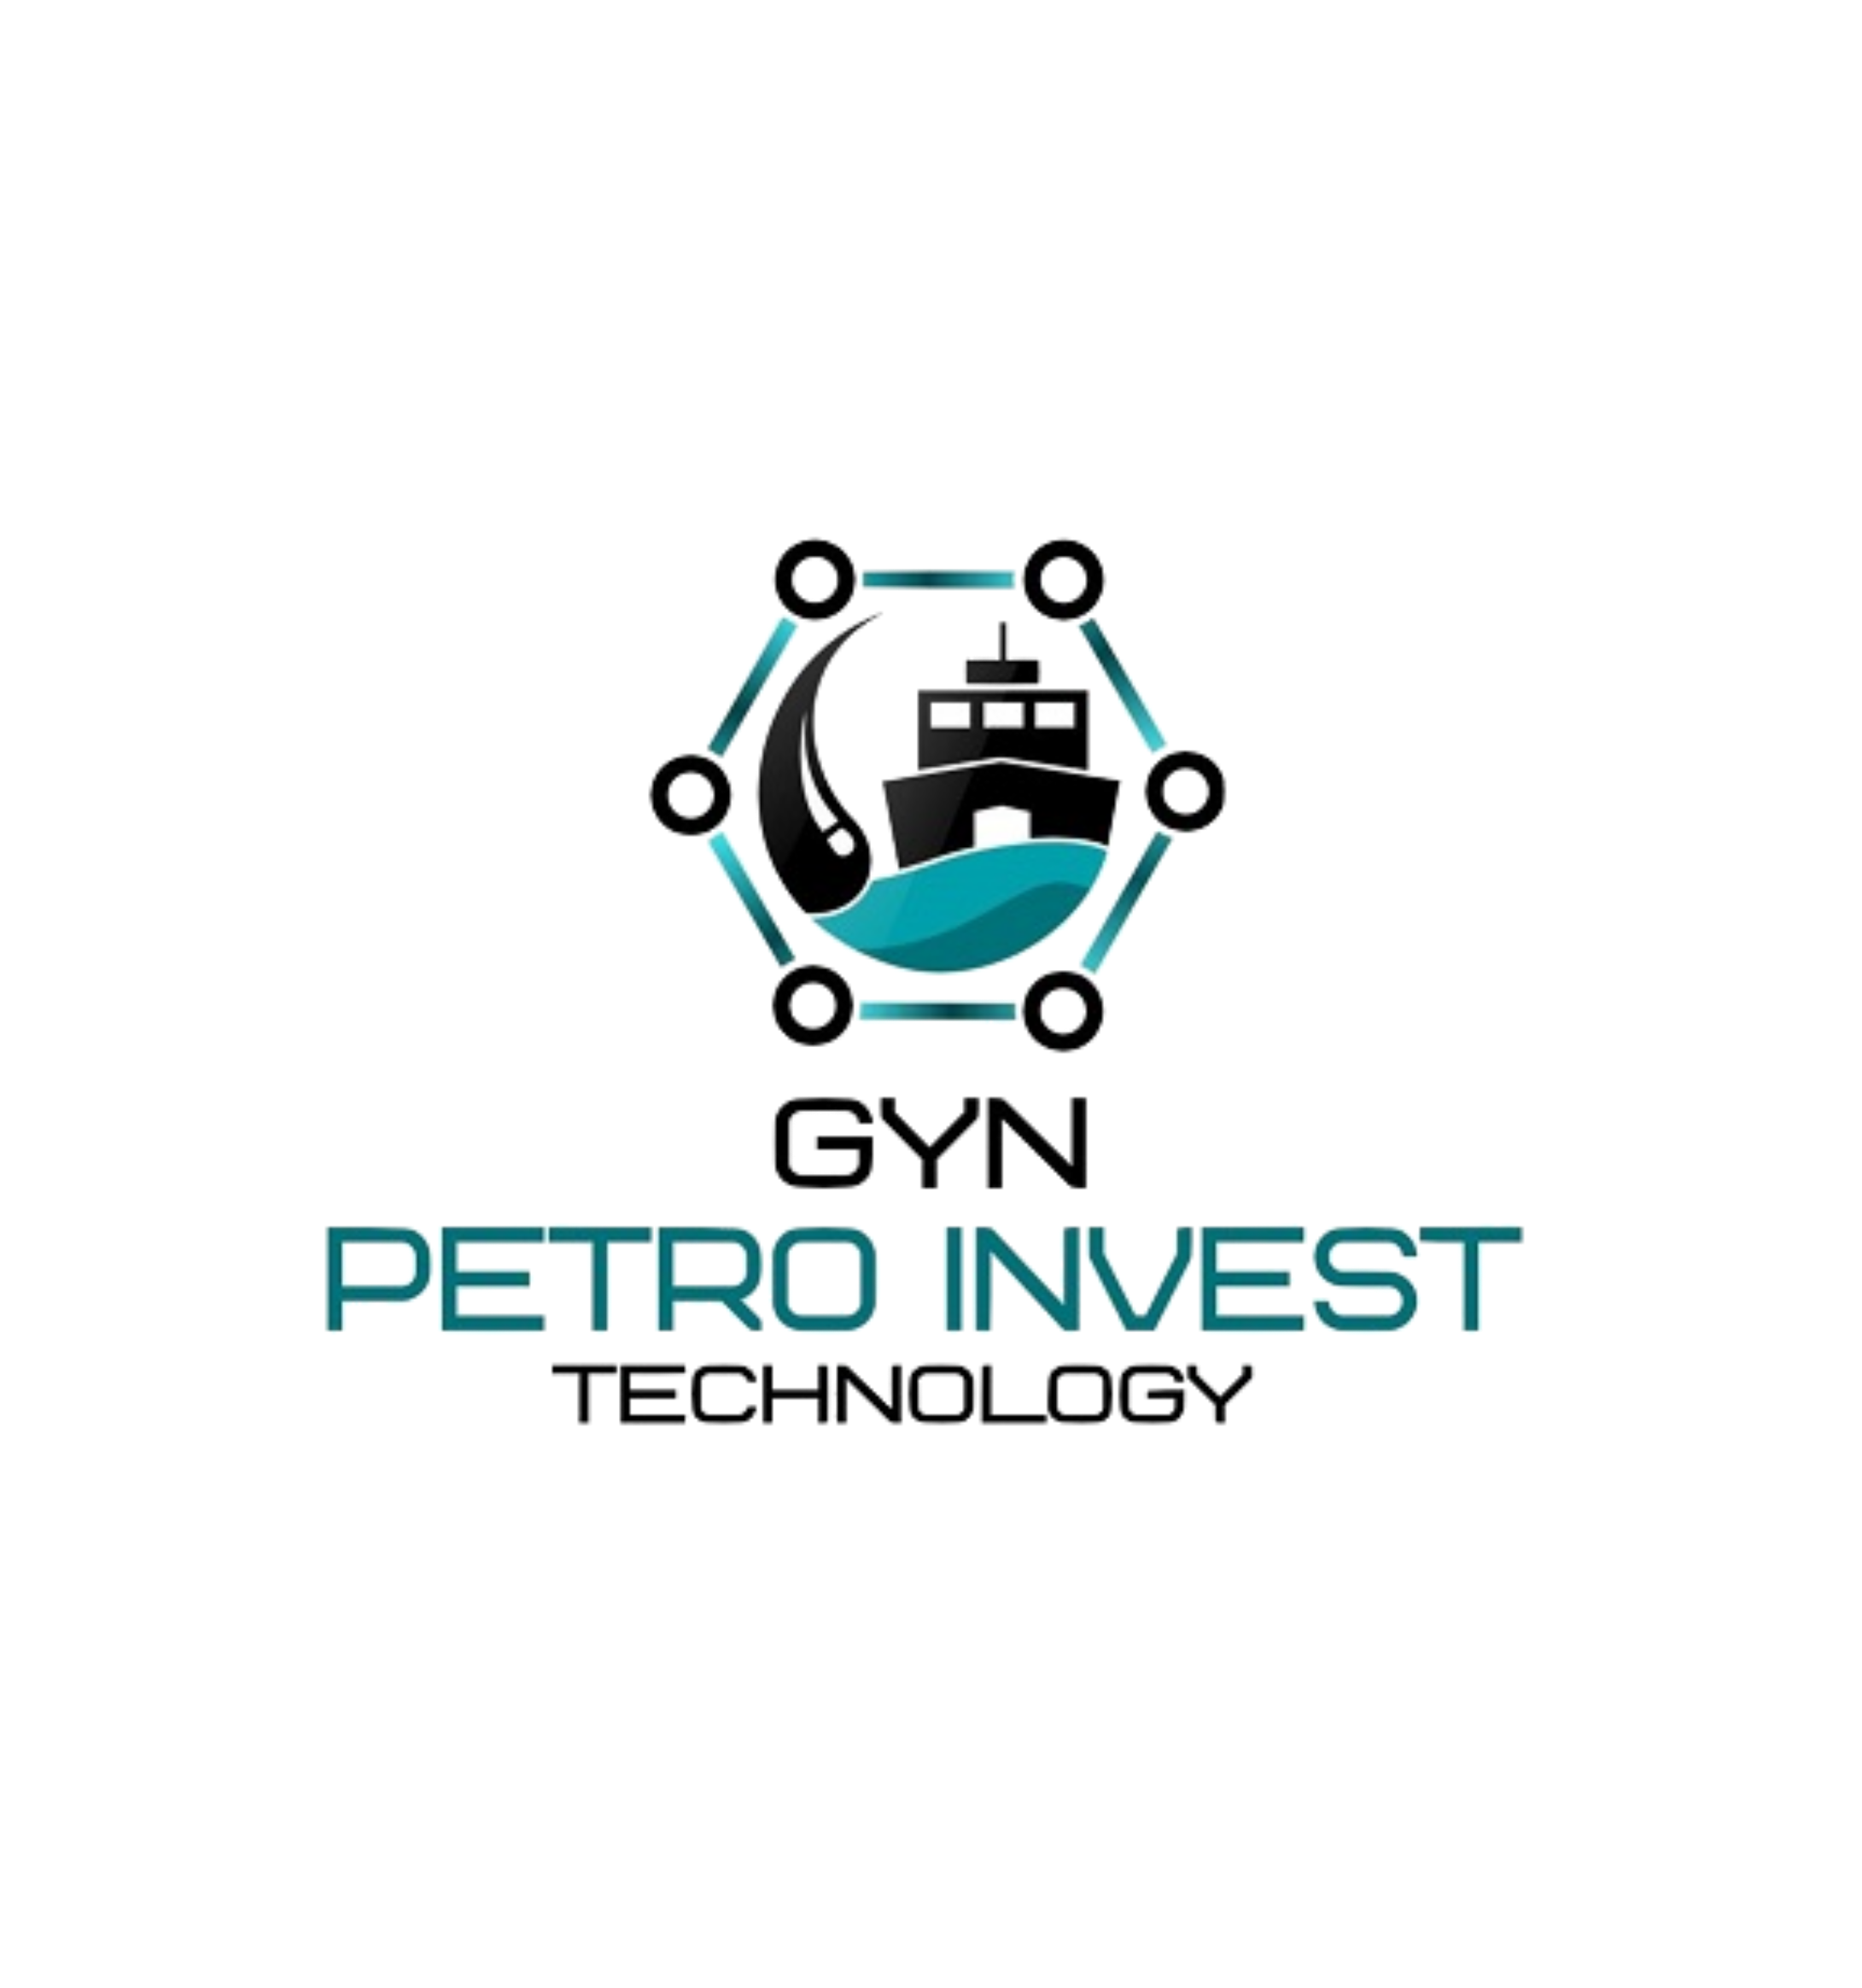 PETRO INVEST TECHNOLOGY GYN